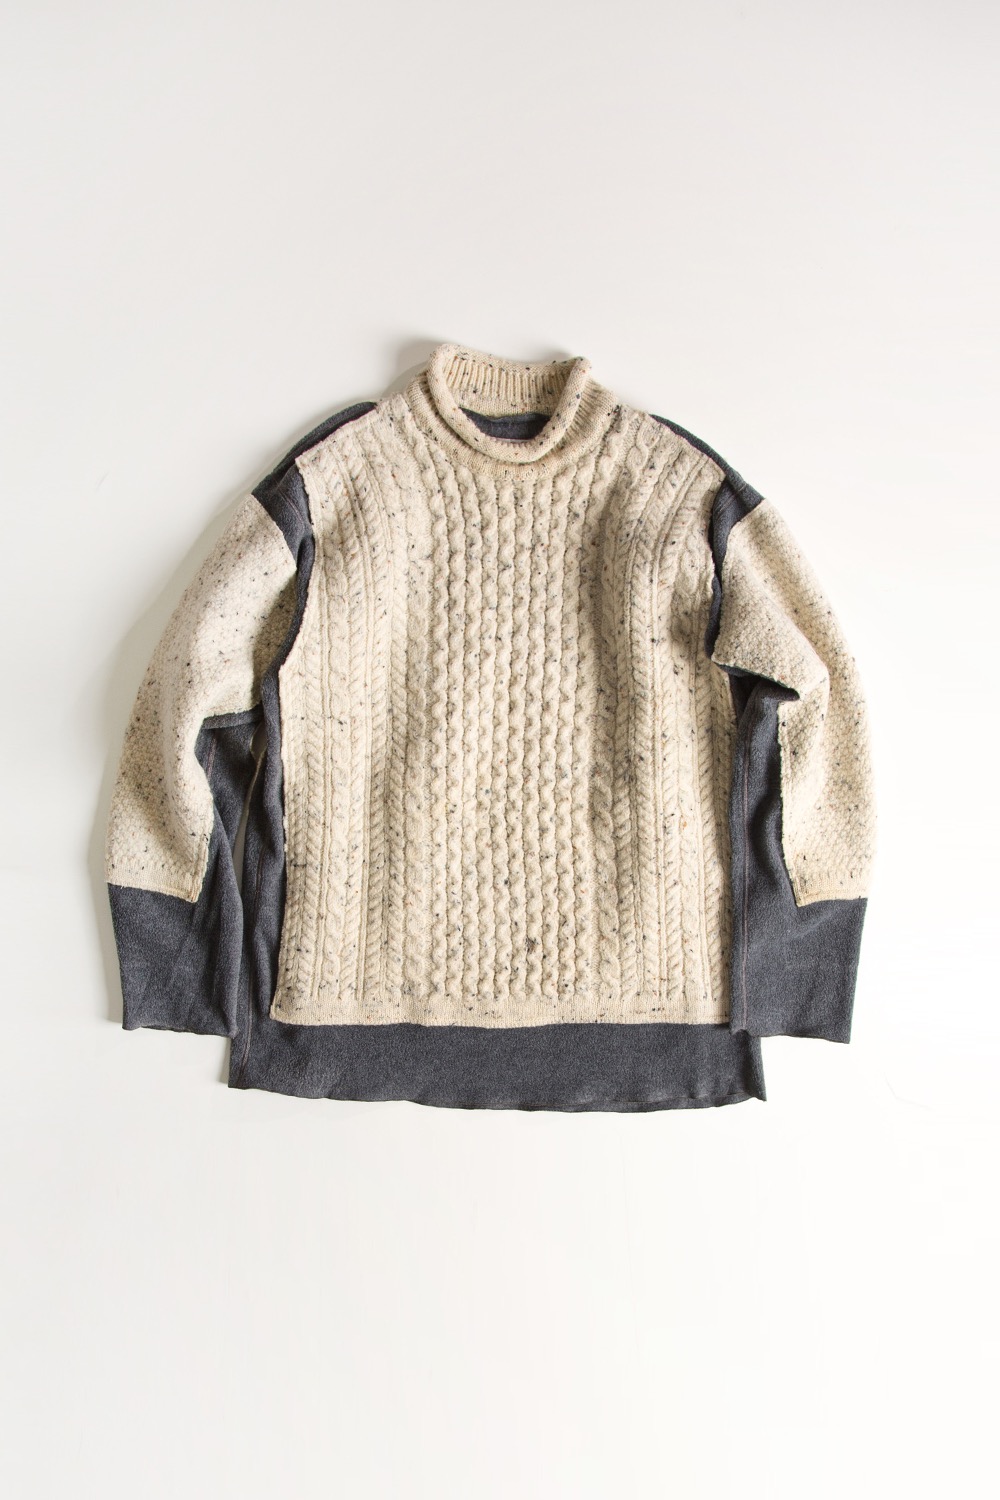 REBUILD BY NEEDLES FISHERMAN SWEATER -&gt; COVERED SWEATER GREY (M-6)